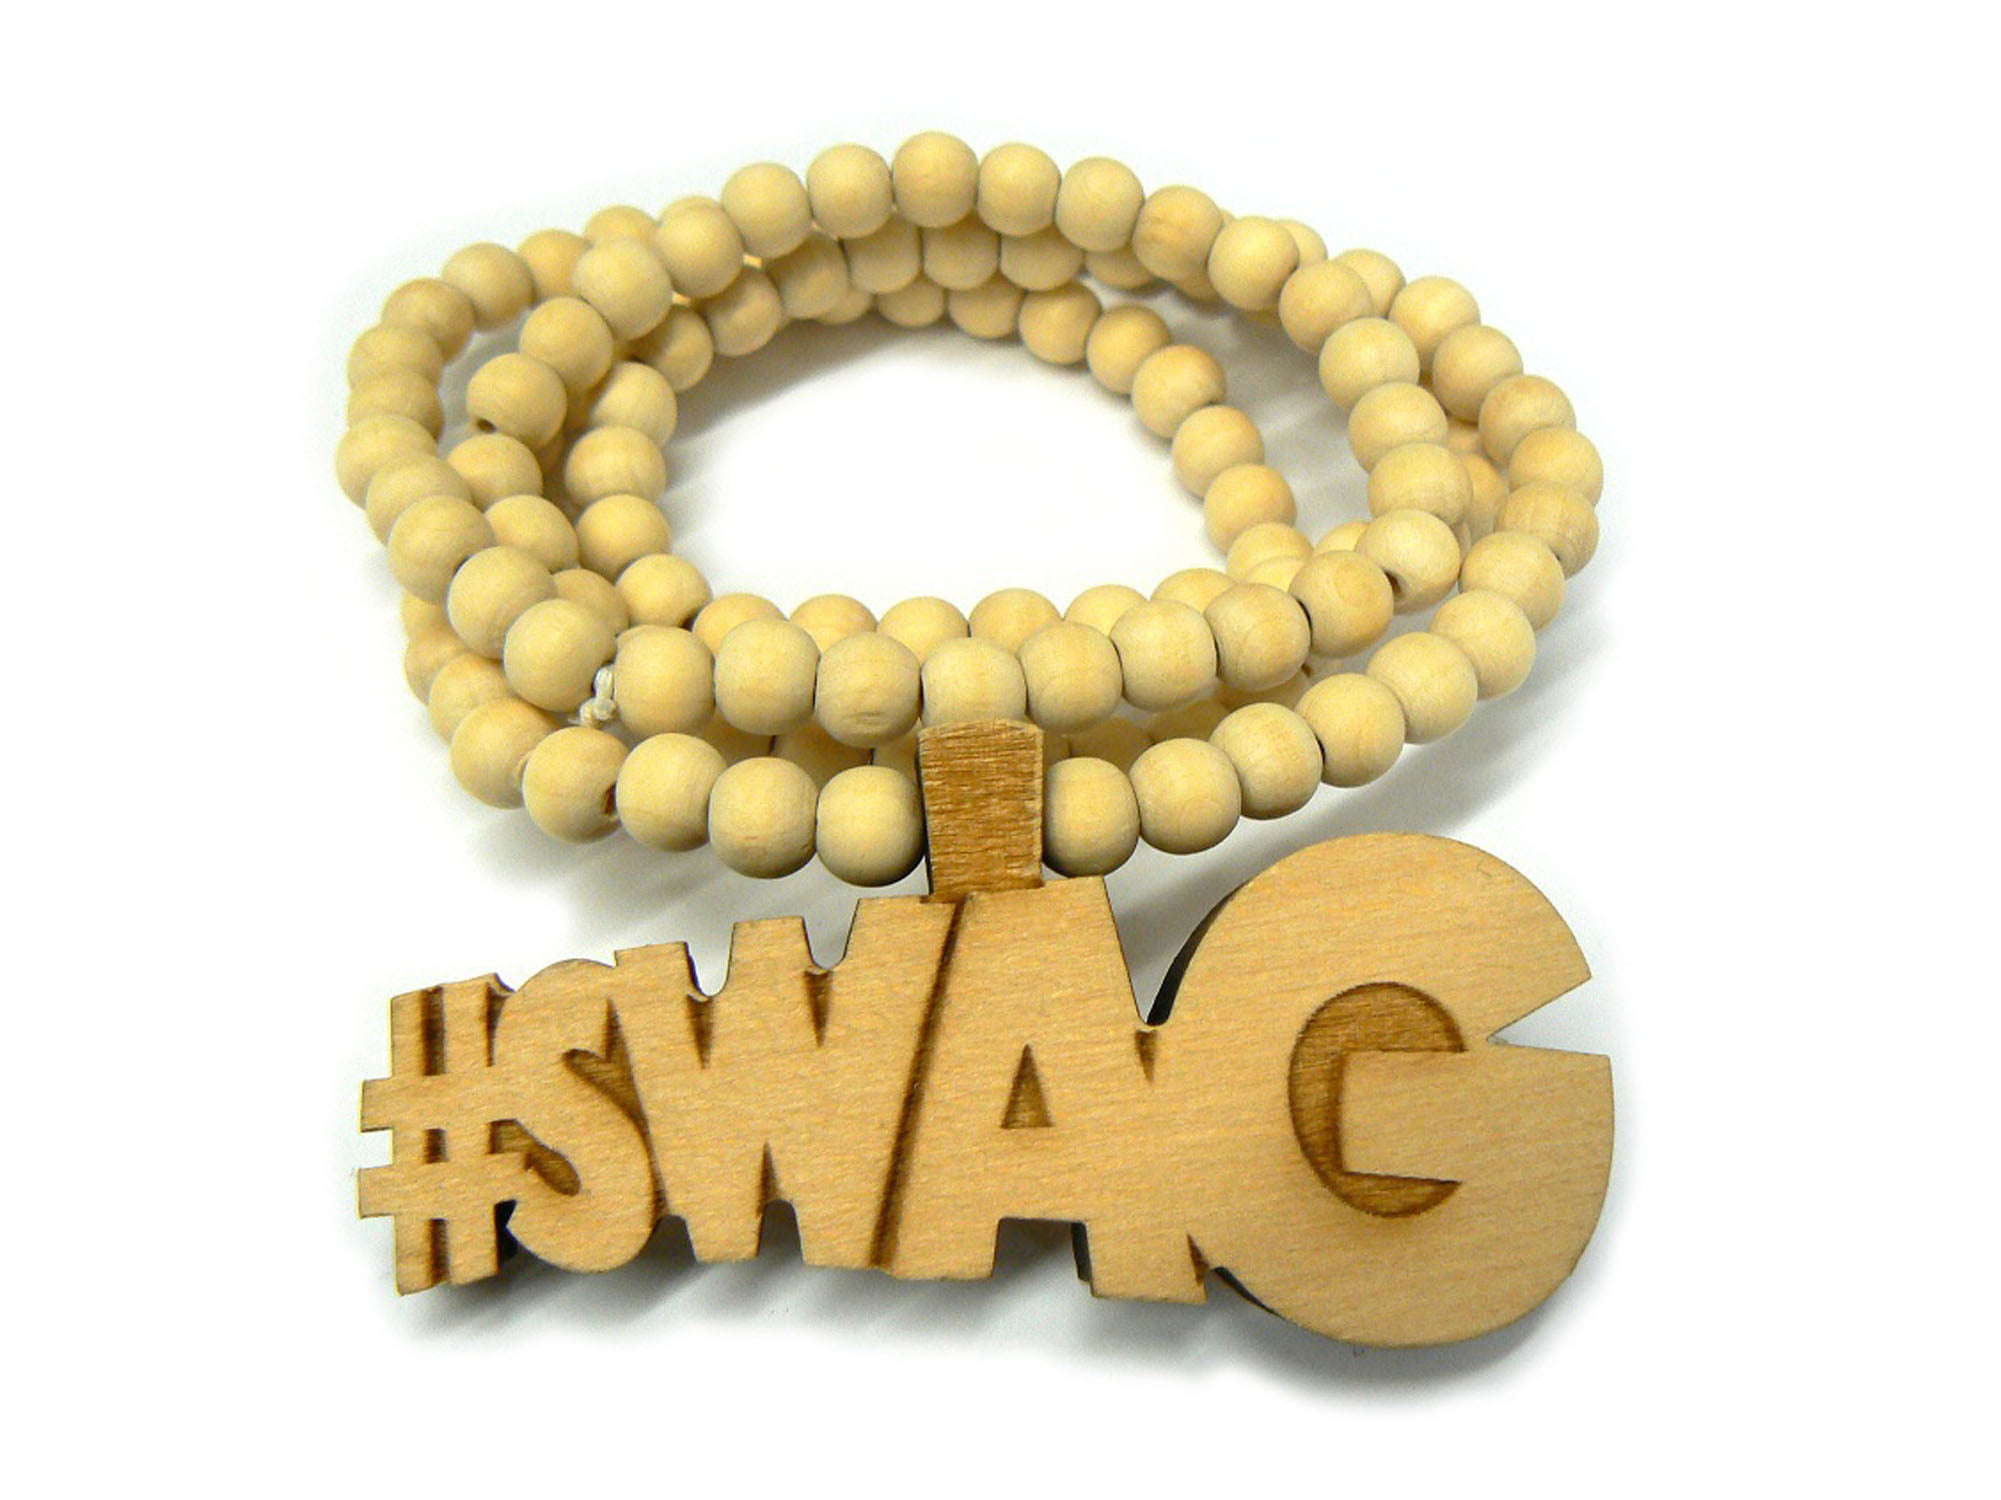 #SWAG Necklace New Good Wood Style Pendant With 36 Inch Wood Bead Chain